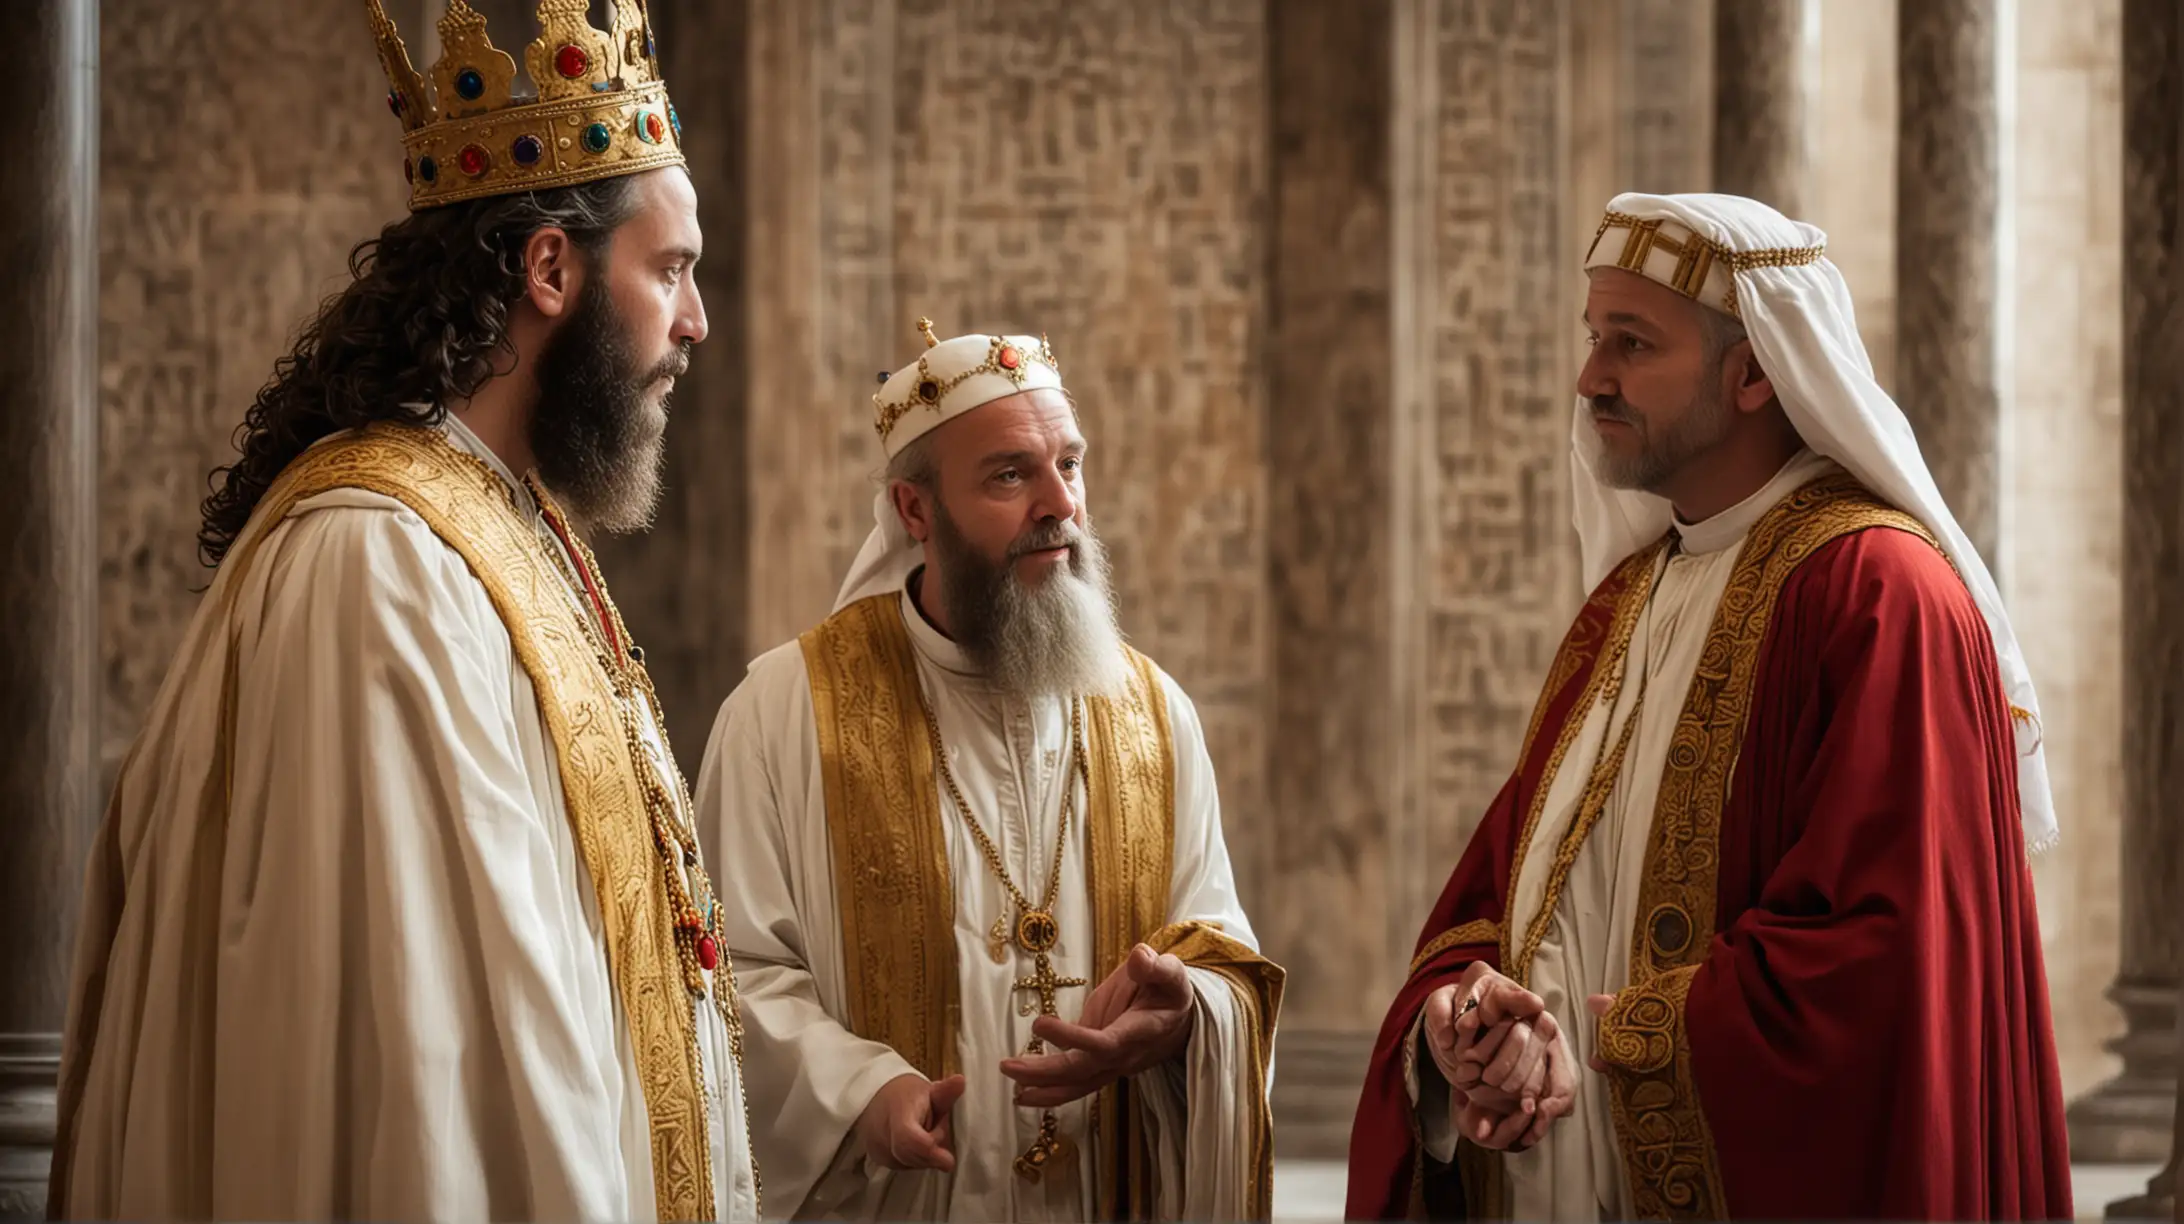 Levitical Priests Conversing with MiddleAged King in Jewish Temple